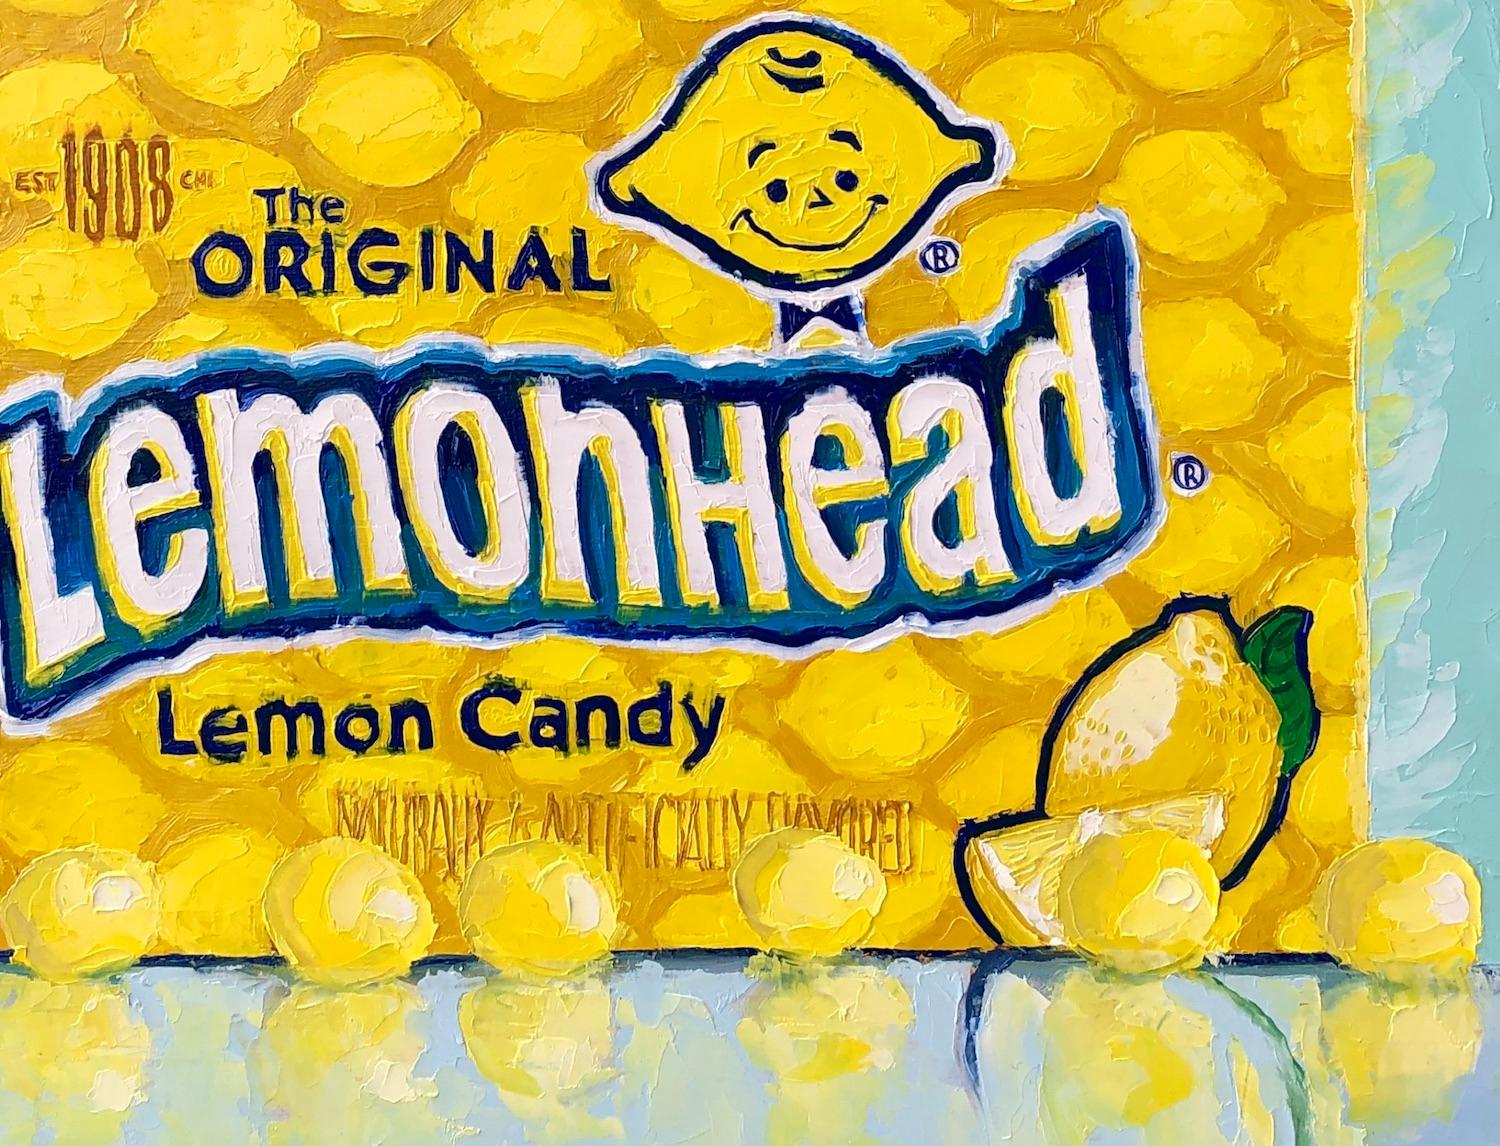 <p>Artist Comments<br>Artist Karen Barton paints a pack of Lemonhead with seven glossy pieces lined in the foreground. She displays an enticing presentation of a classic candy. Karen paints with a brush and a palette knife to exhibit bold colors and